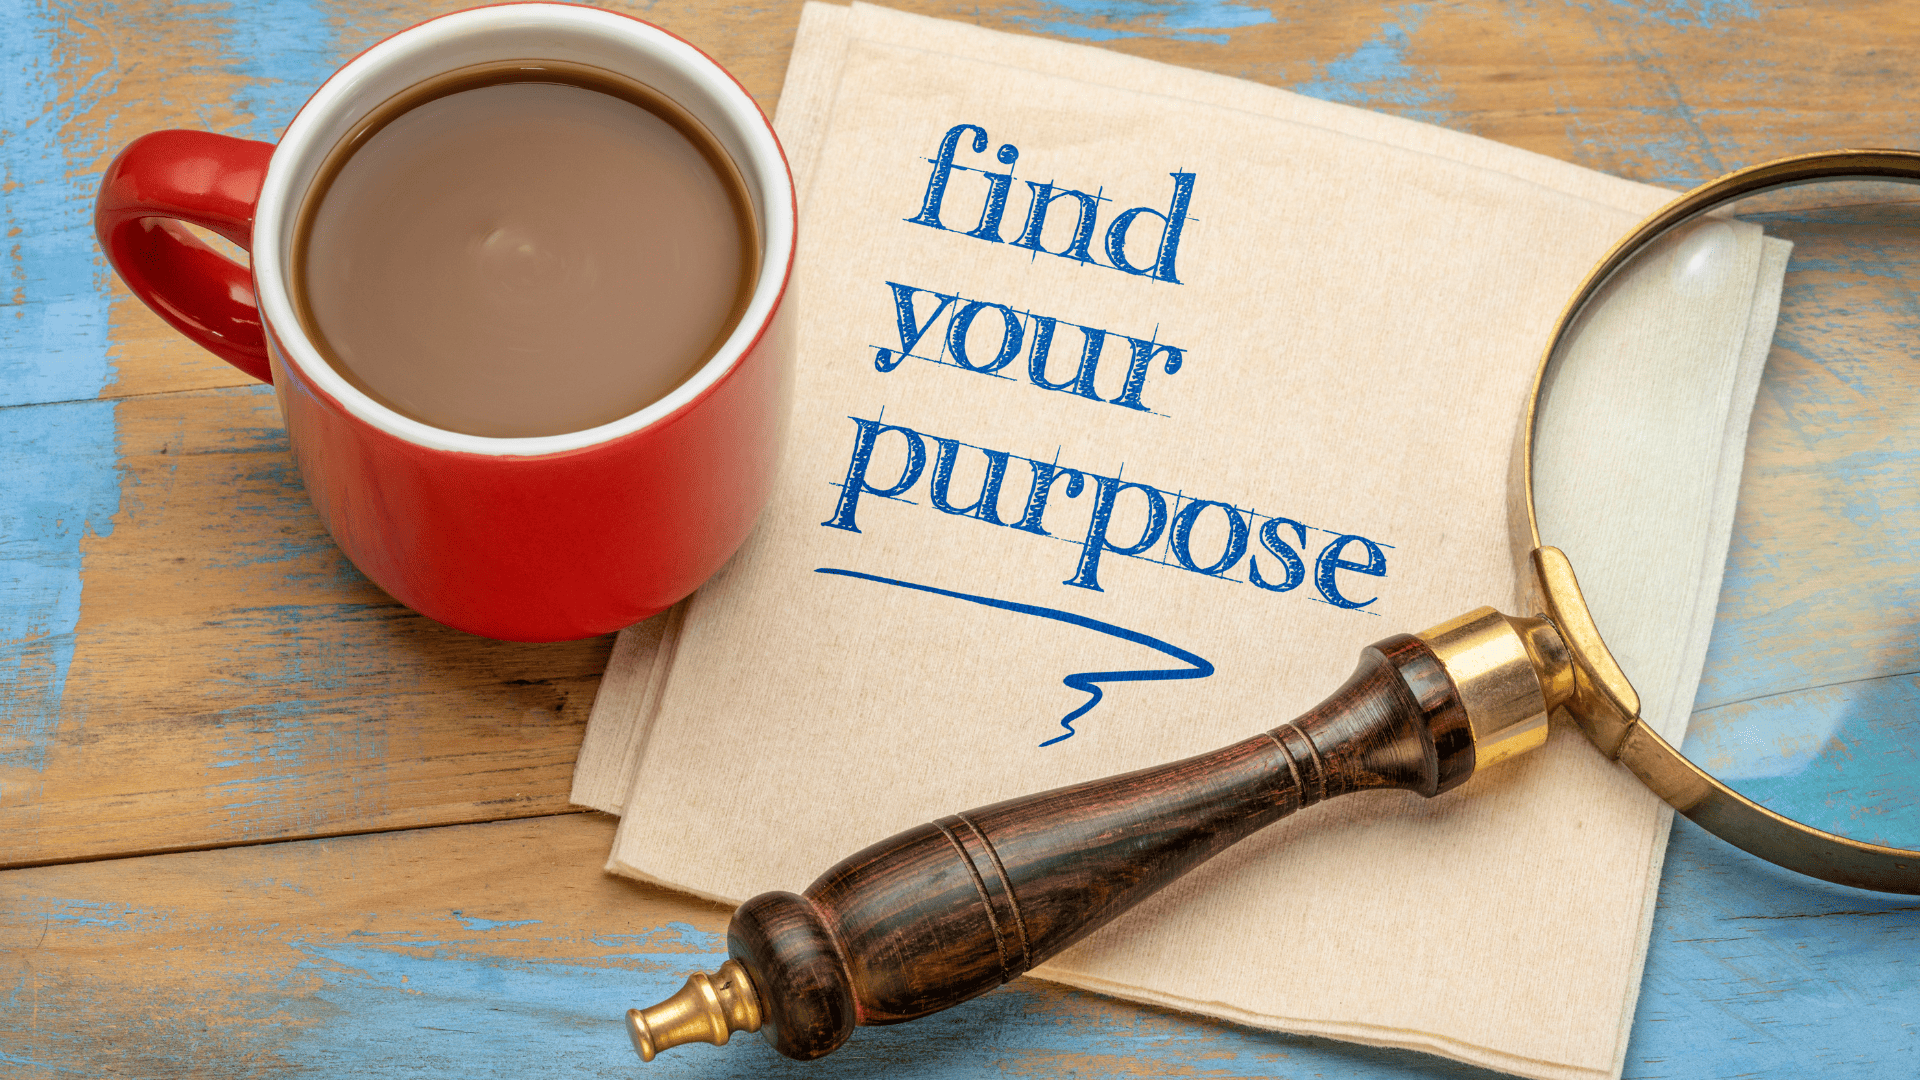 Find Your Passion and purpose in life.